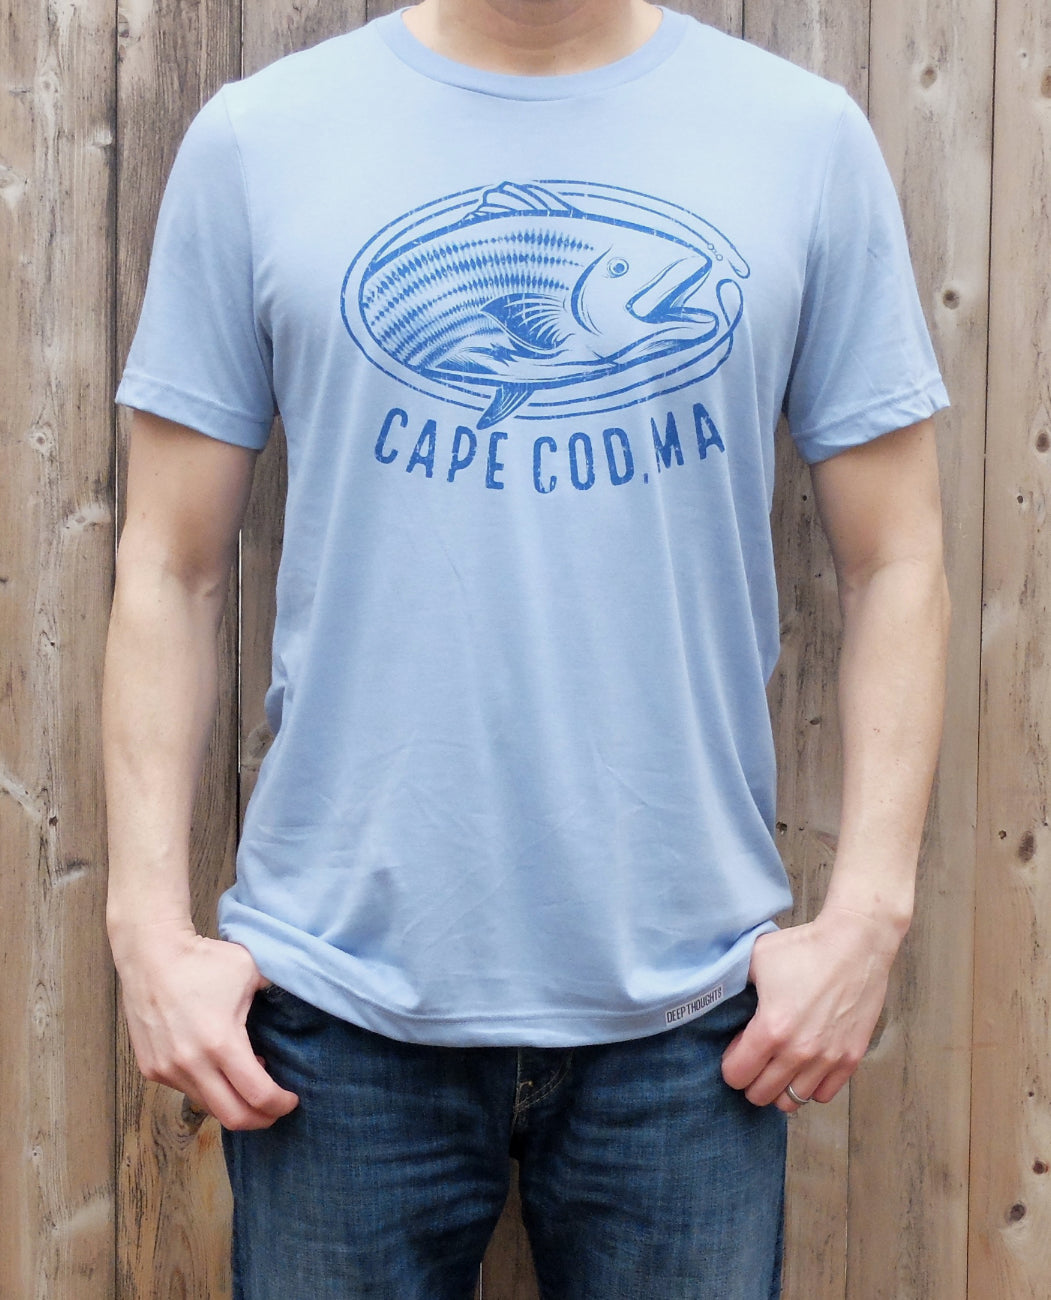 man wearing heather blue t-shirt with blue vintage style striped bass graphic and 'Cape Cod' text